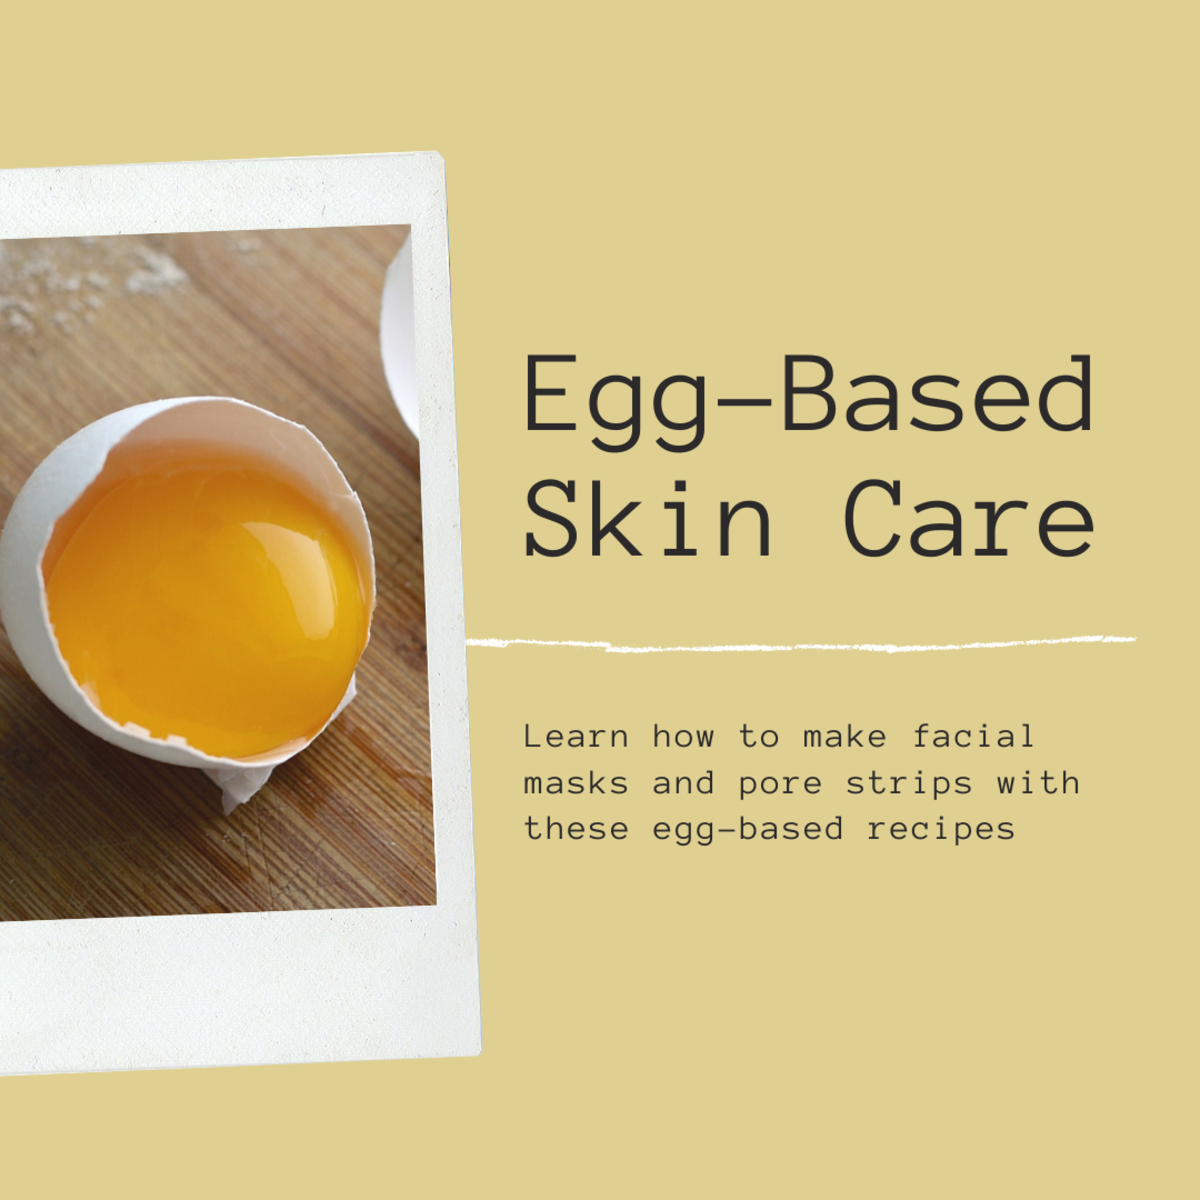 This article will show you how to make both a facial mask and pore strips from just a single egg.